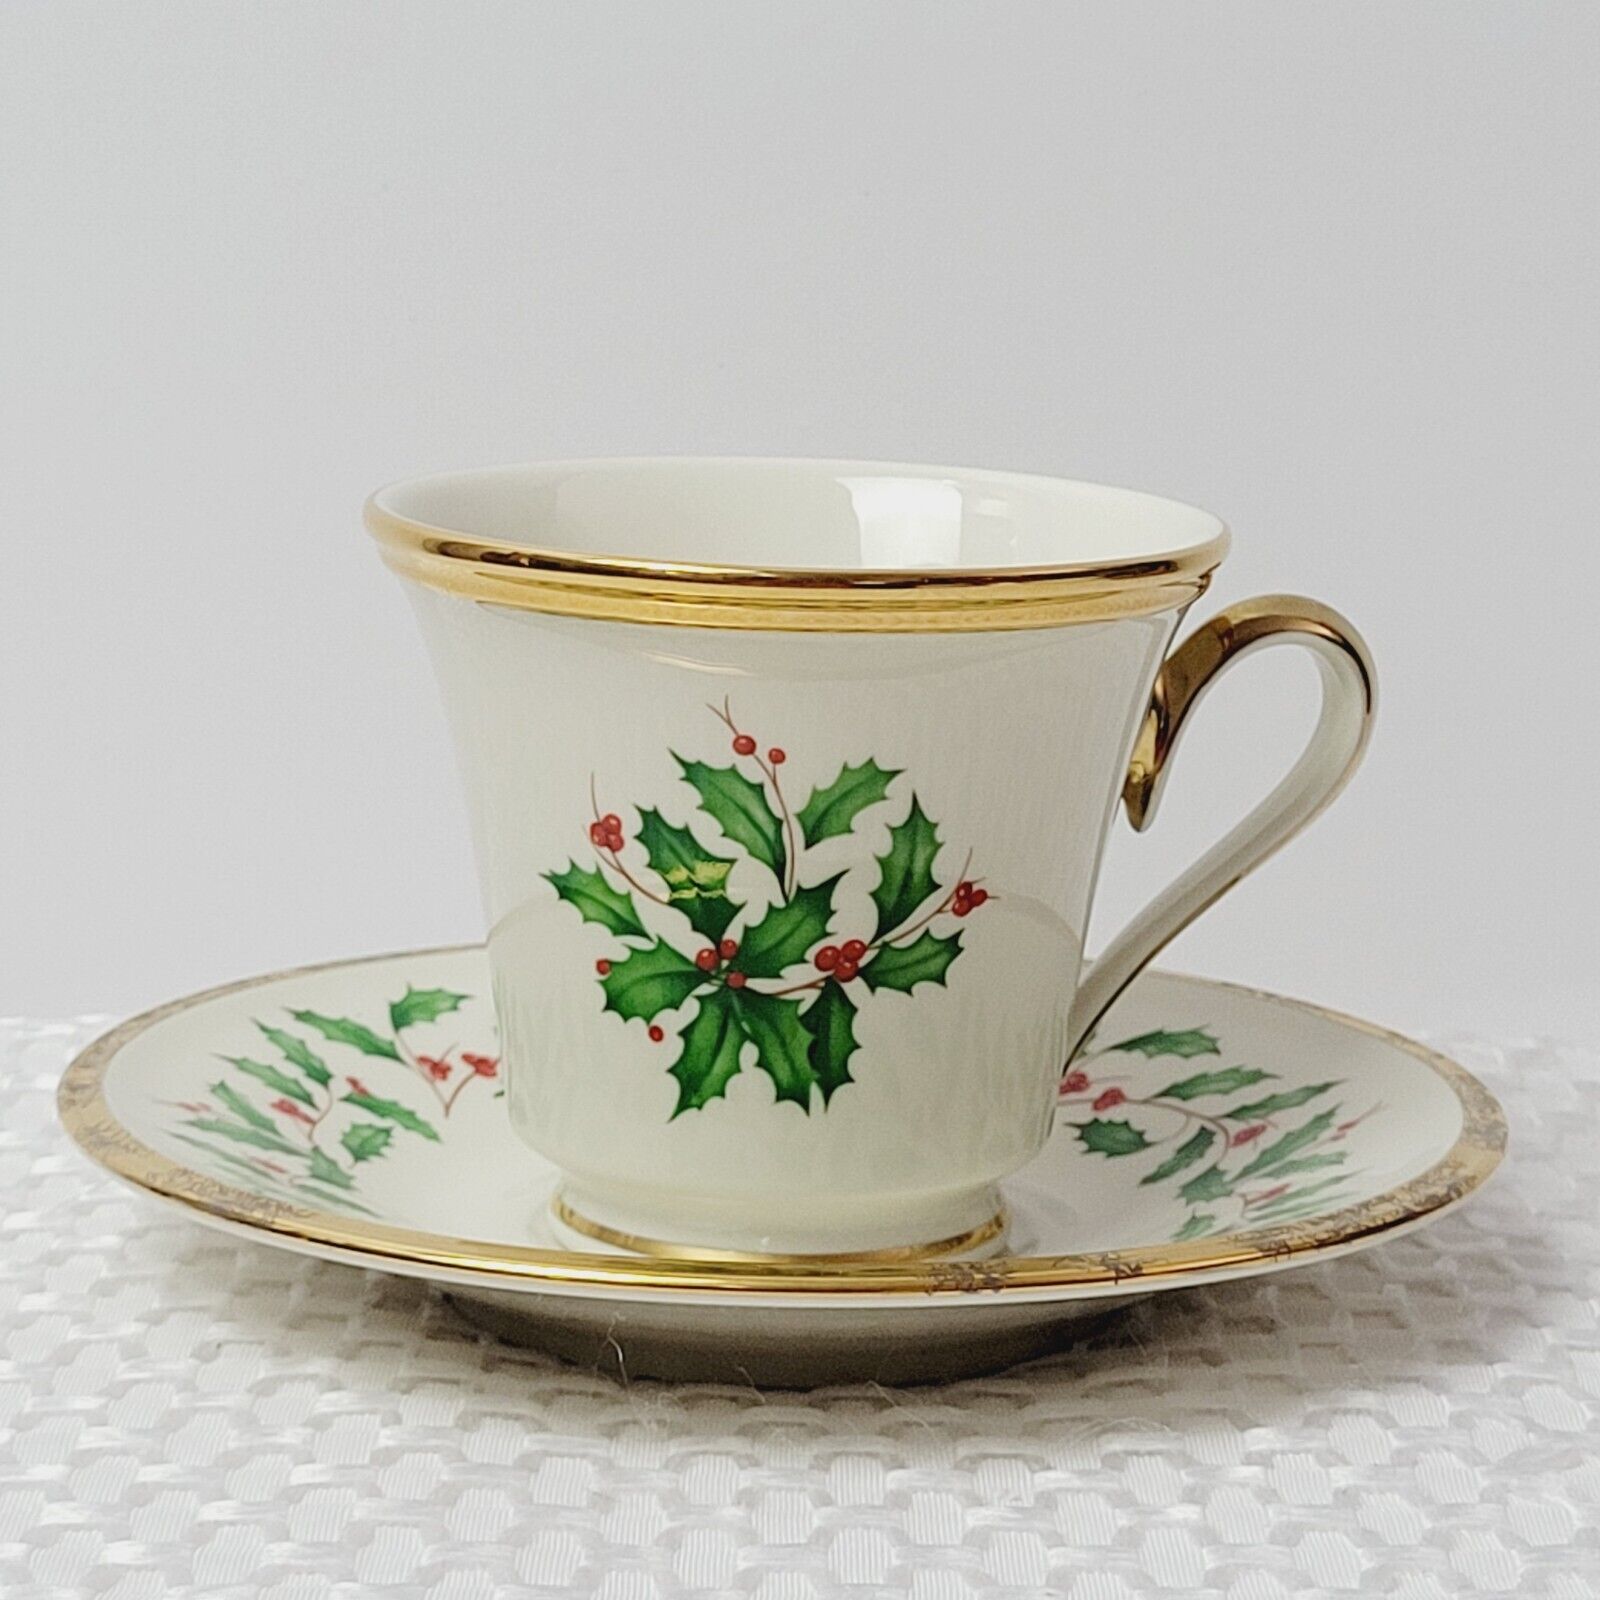 Vintage LENOX Fine Bone China Holly Holiday Footed Teacup & Saucer Made in USA